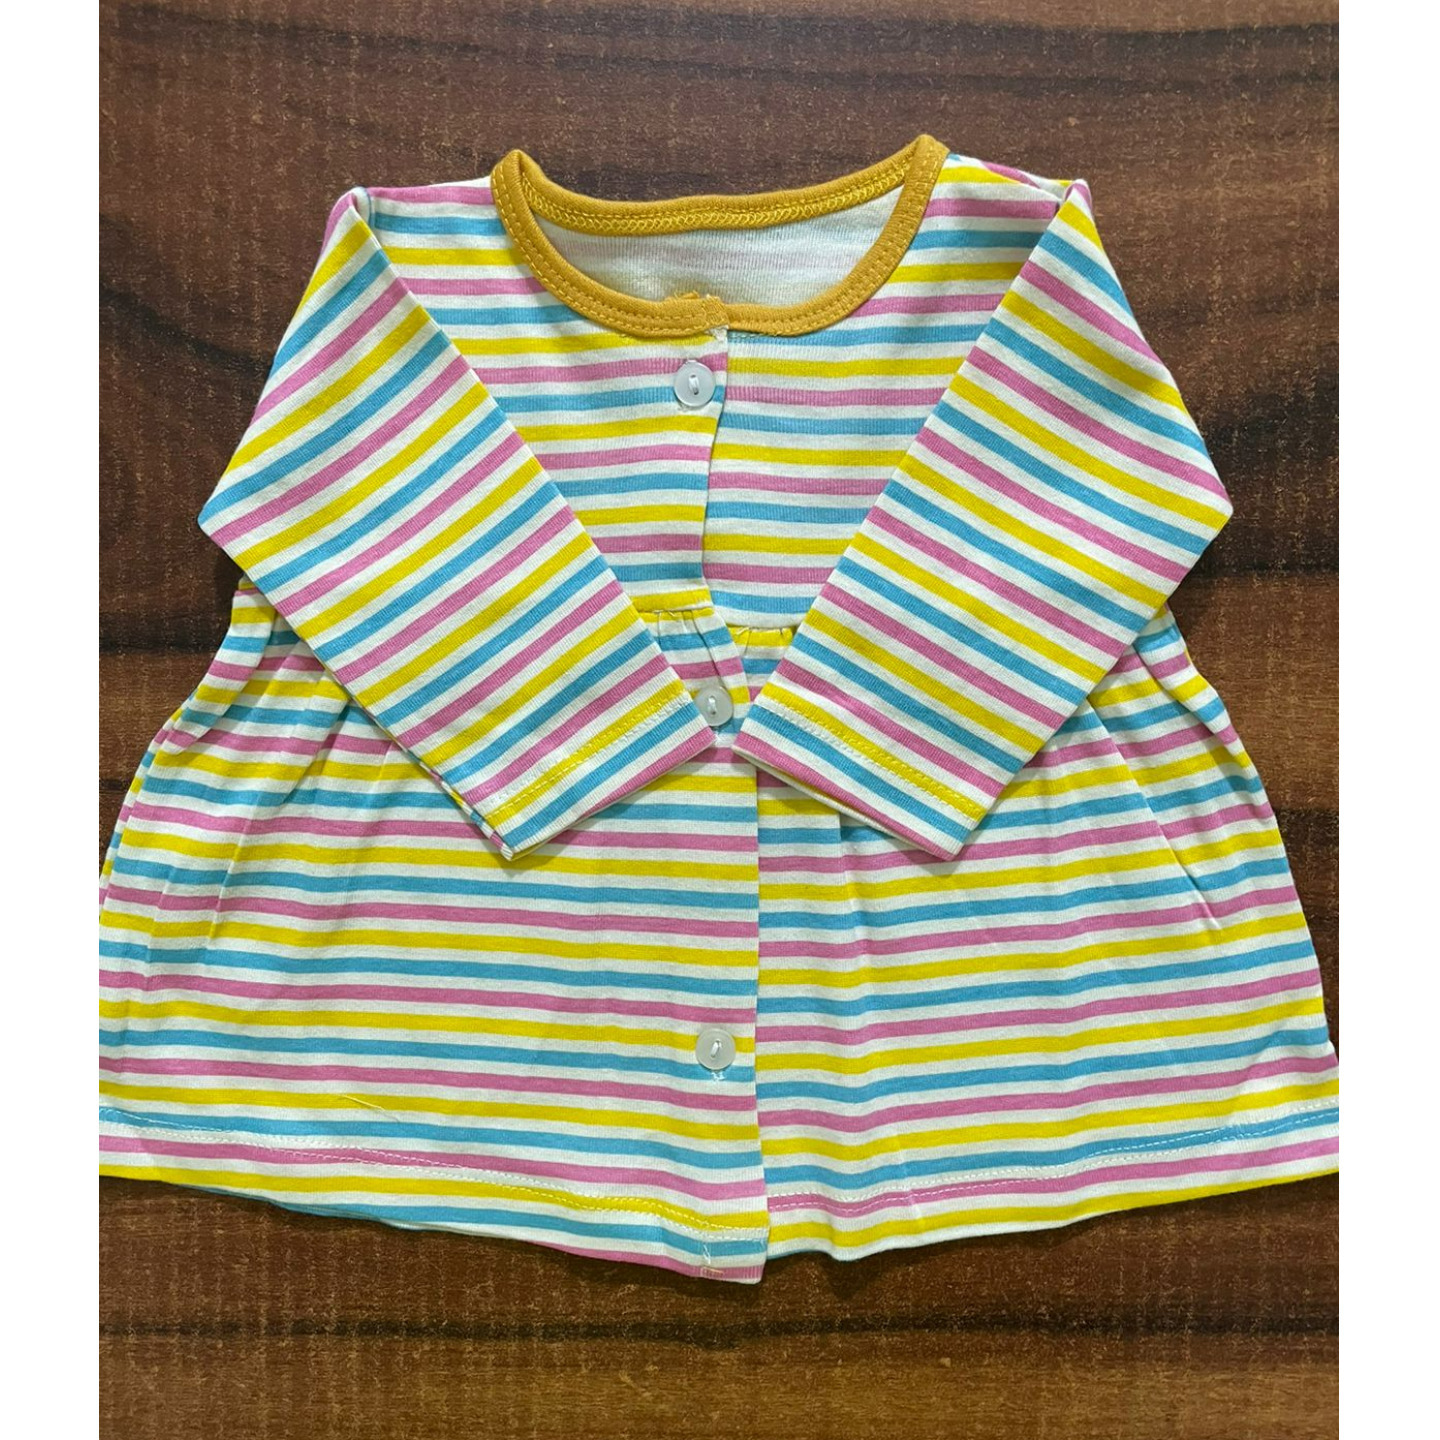 Precious One Bow Shorts Made in India 18-24 Months Yellow Stripes